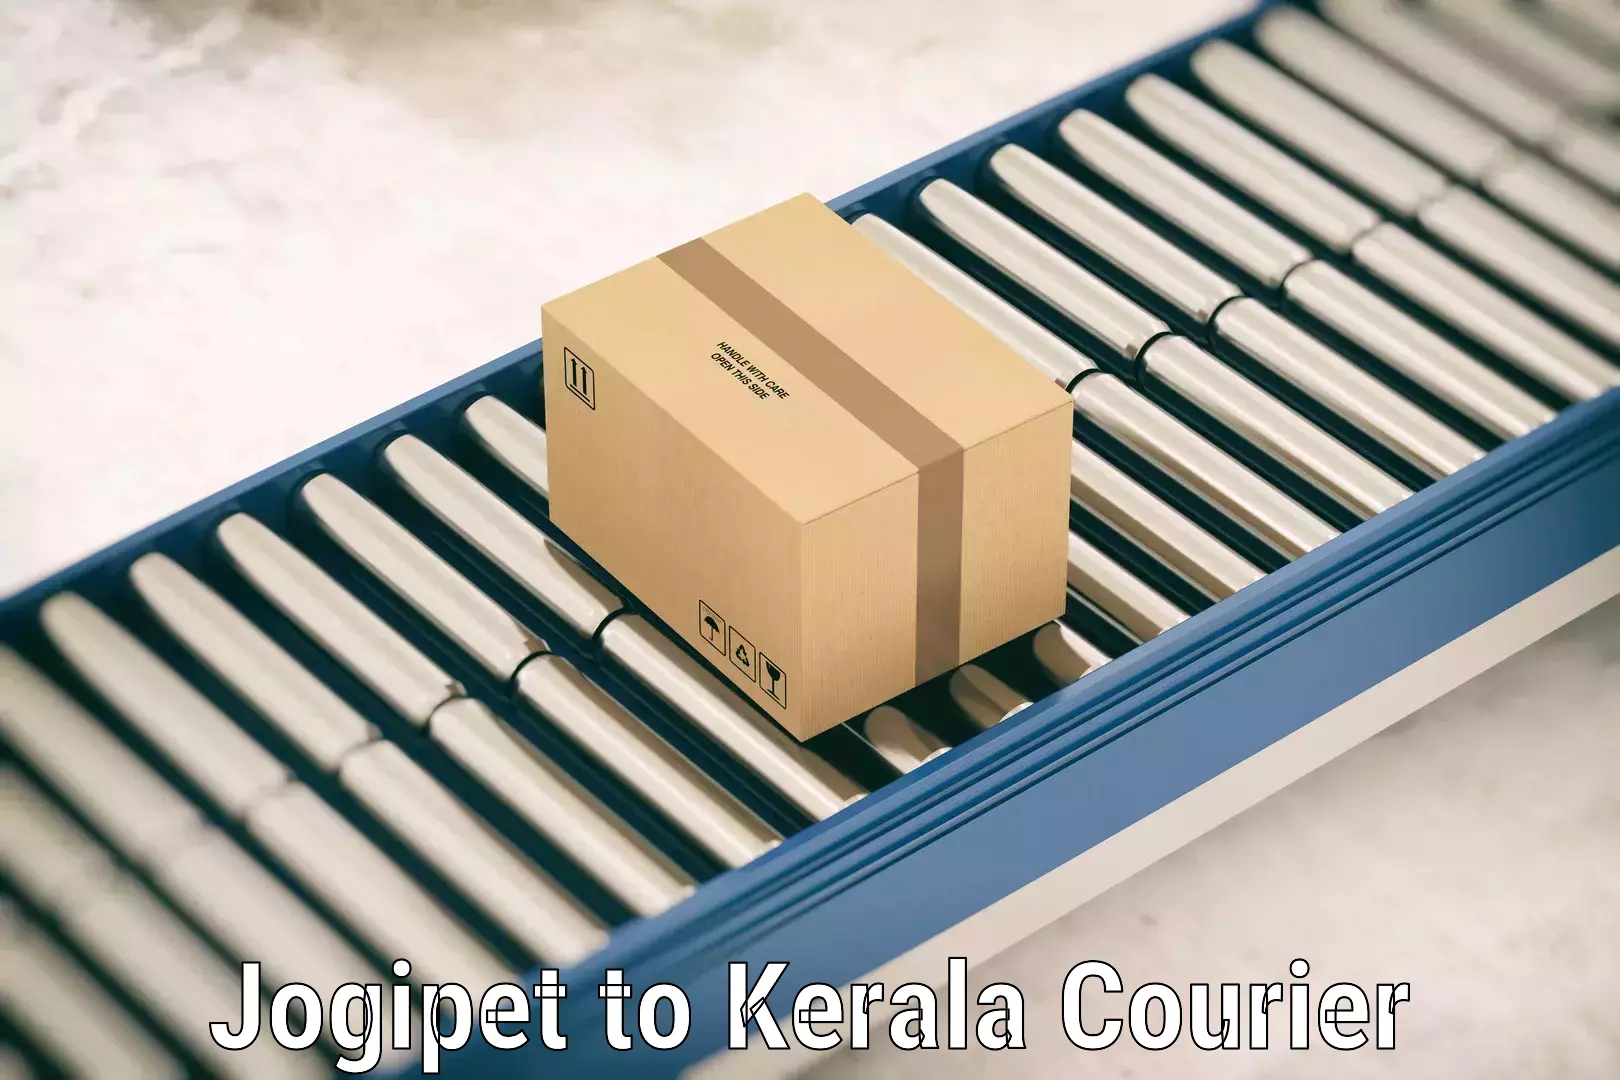 Baggage delivery optimization Jogipet to Kerala